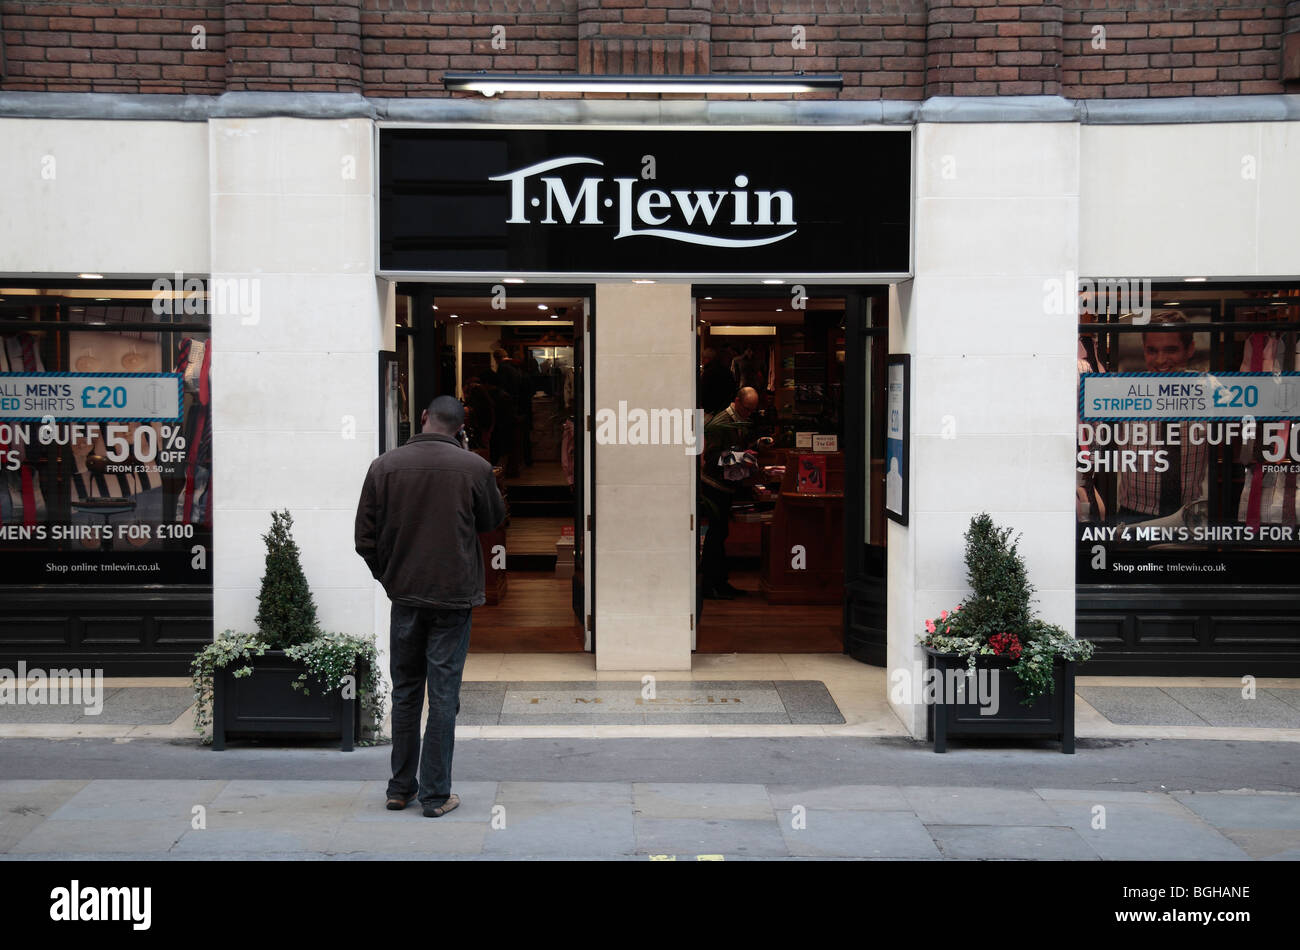 The shop front and entrance to the T M Lewin shirtmaker's and outfitters on Jermyn Street, London. Nov 2009 Stock Photo